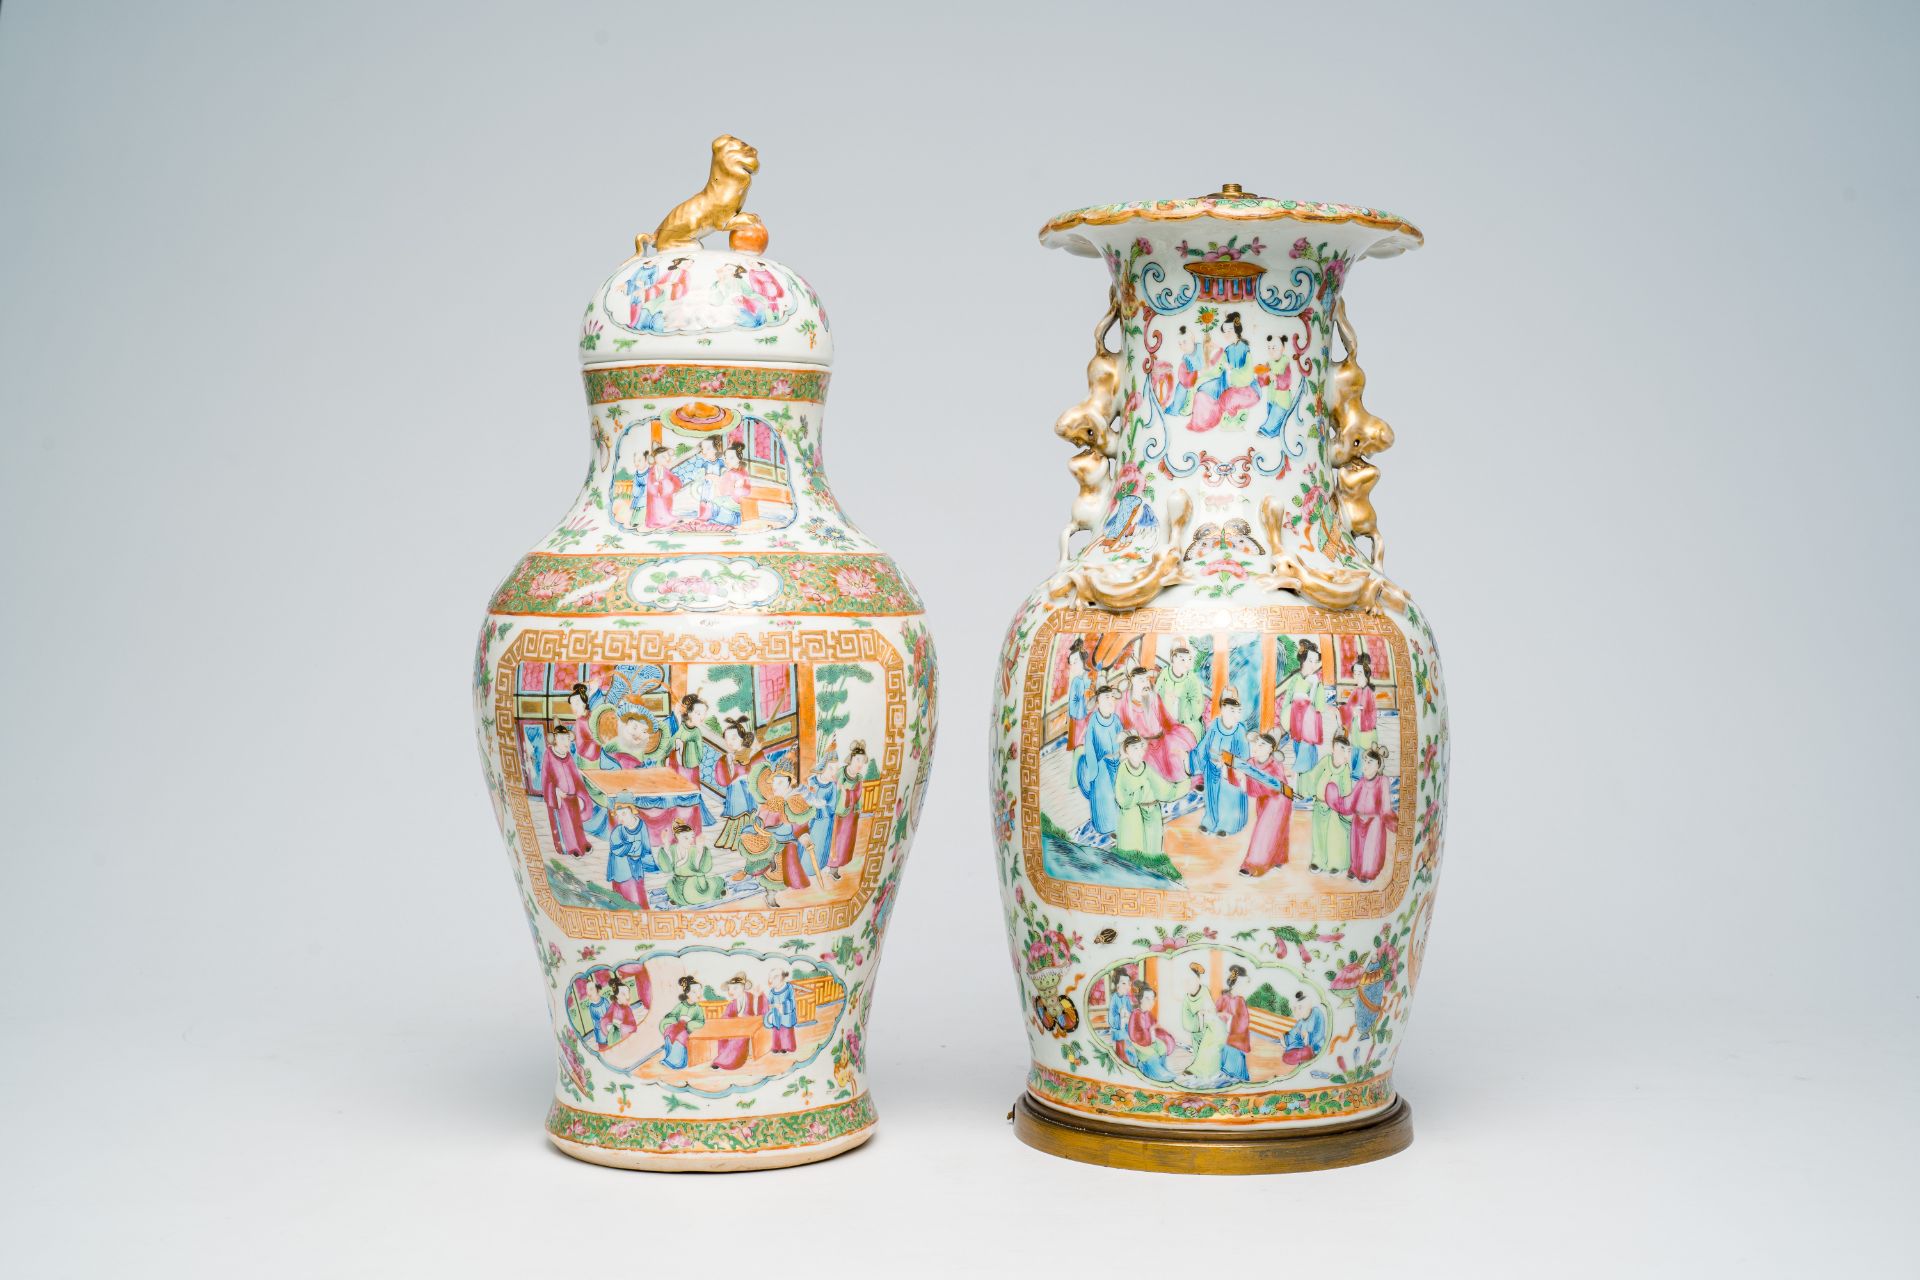 Two Chinese Canton famille rose vases with palace scenes, one of which mounted as a lamp, 19th C.